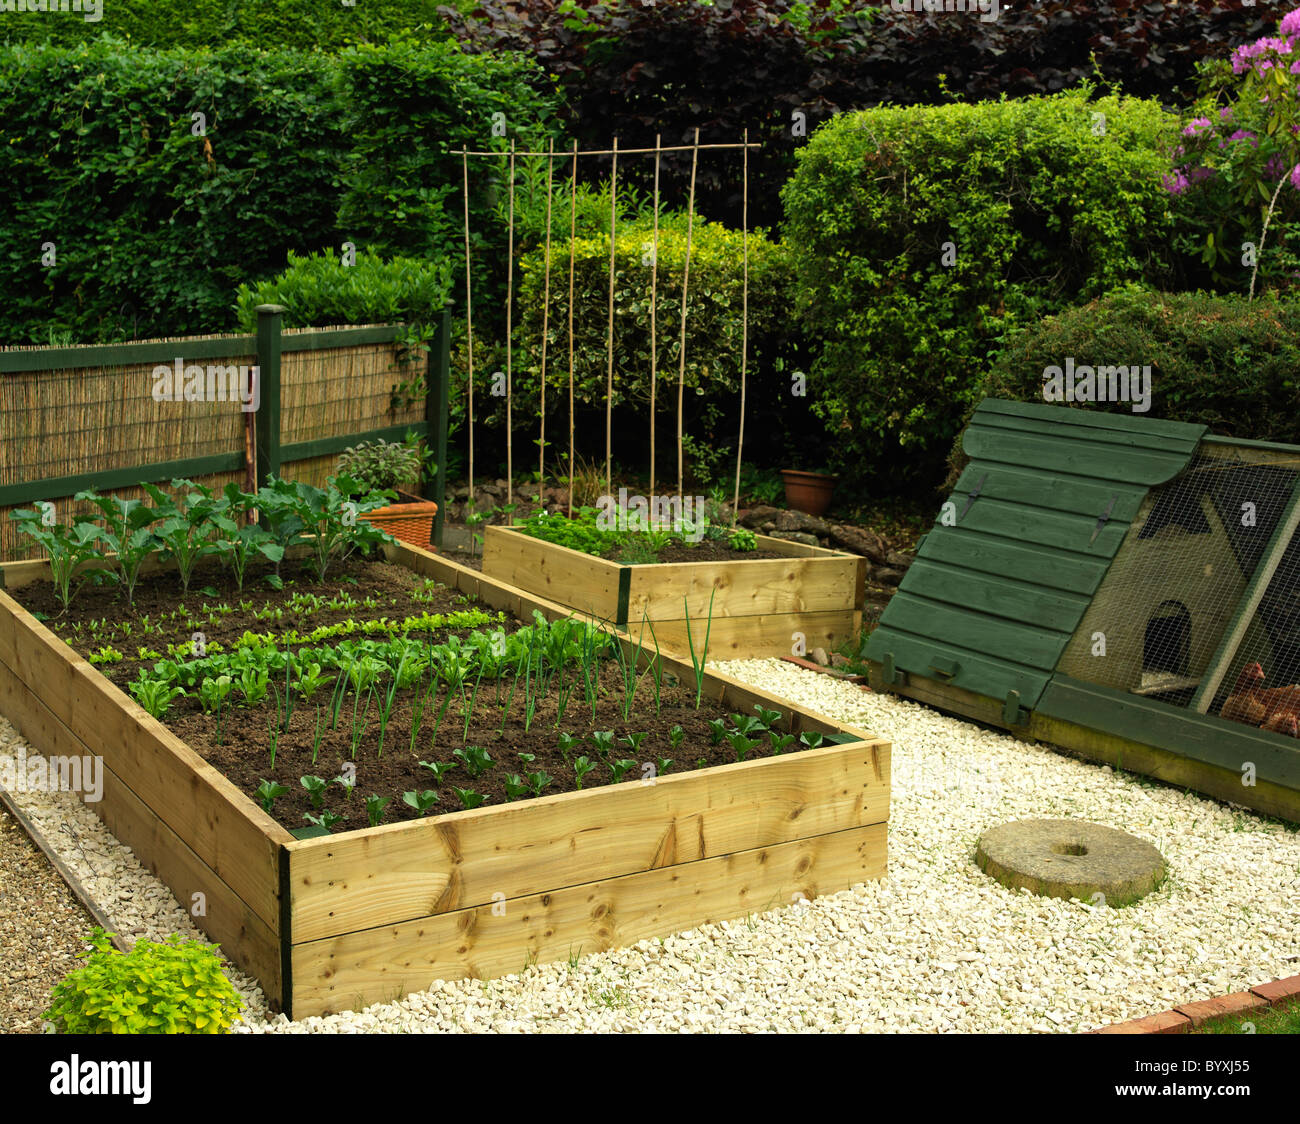 Compact garden,raised domestic garden vegetable beds with plants and chicken coop Stock Photo